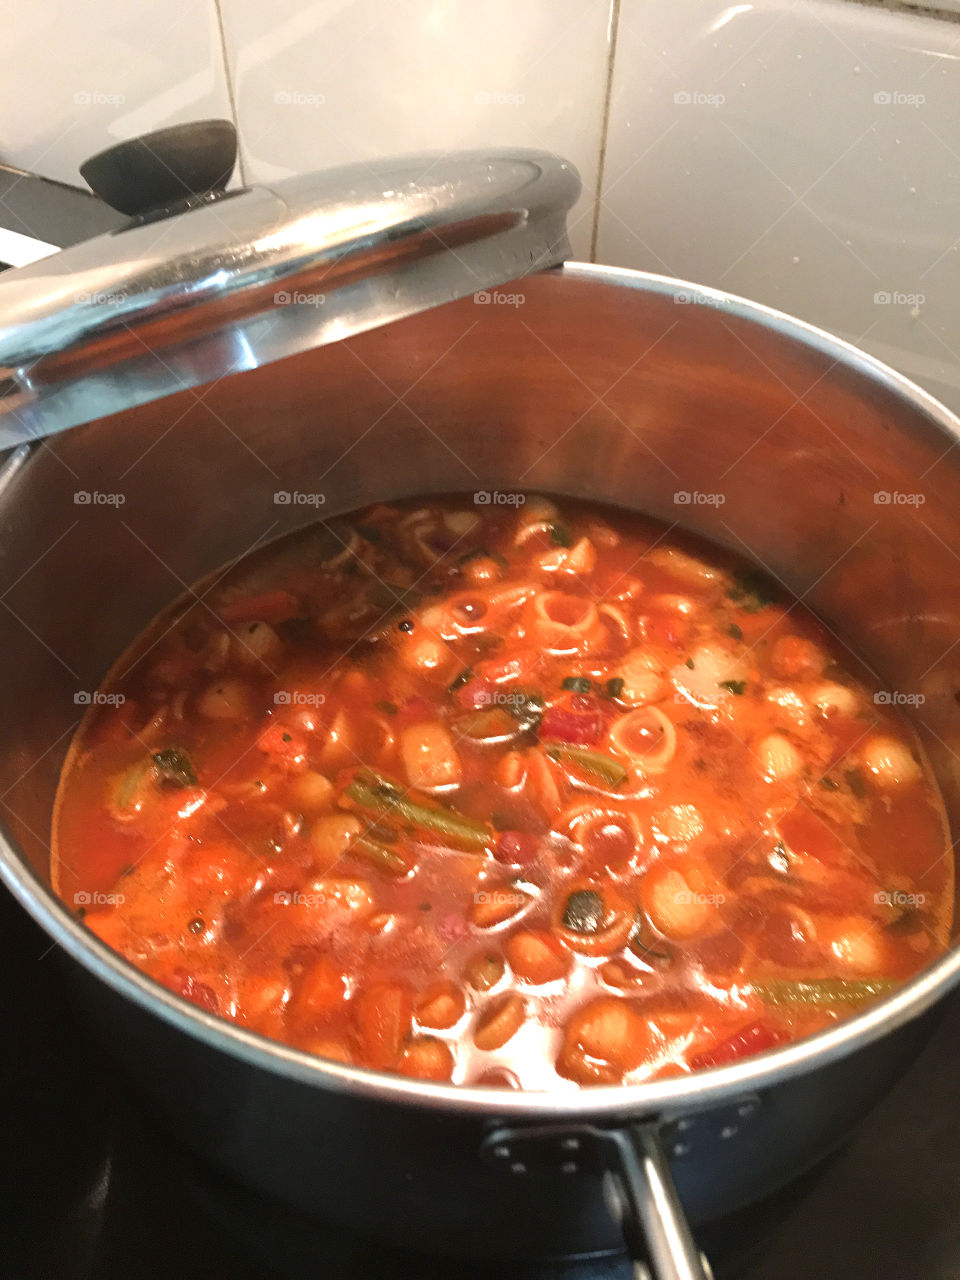 What's cooking? Italian minestrone soup, shown here cooking in a stainless steel pot on the stove with the lid off